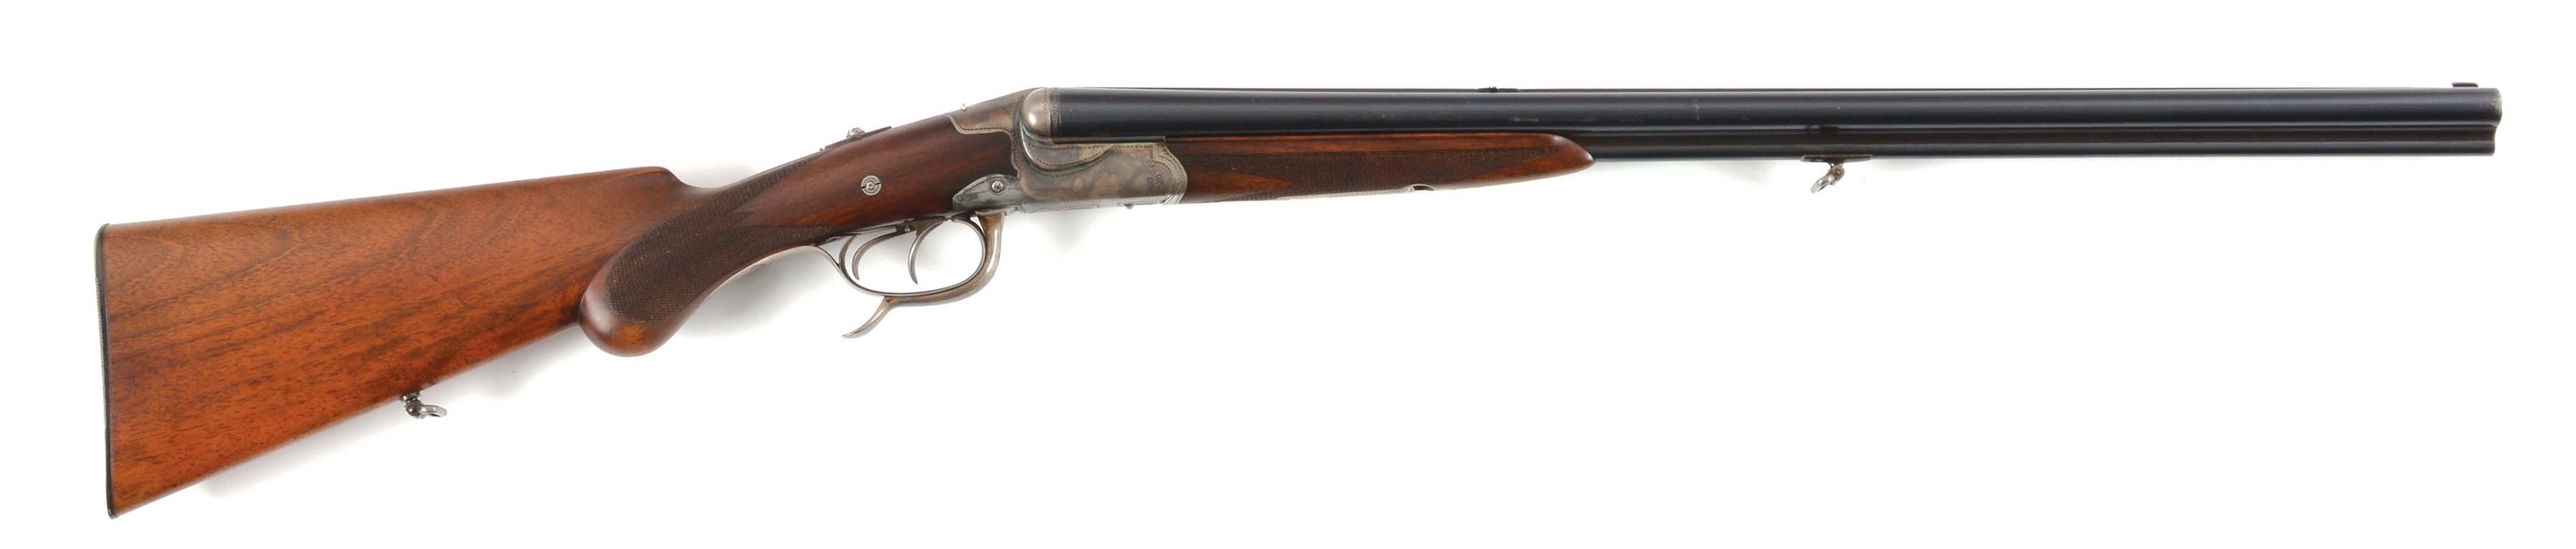 (C) FRED ADOLPH DRILLING SIDE BY SIDE SHOTGUN.